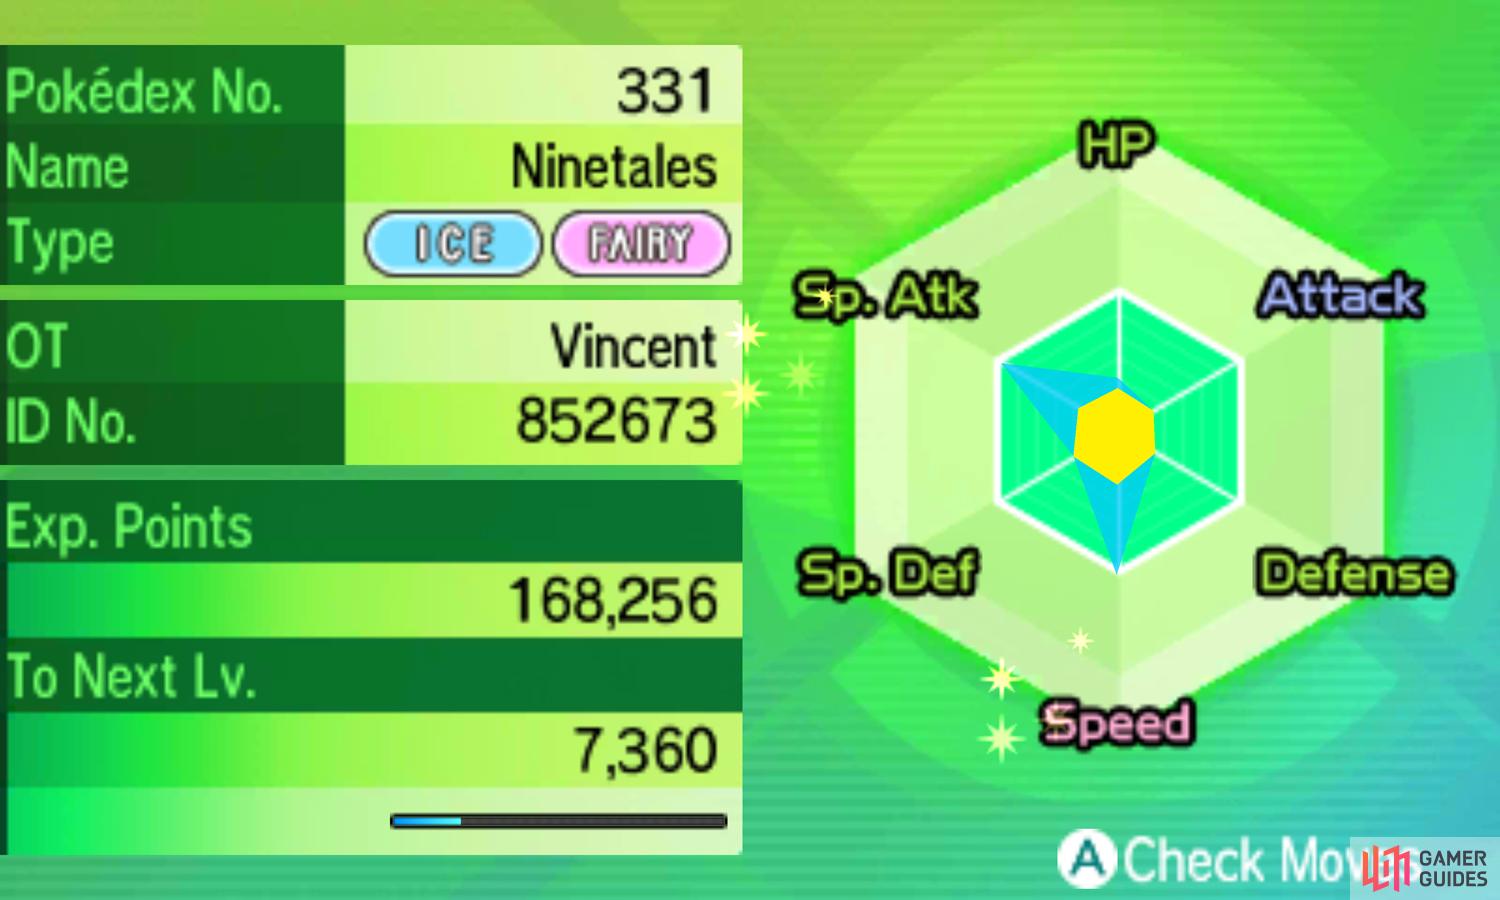 Press the Y button in the status screen to view your Pokemon's EVs.